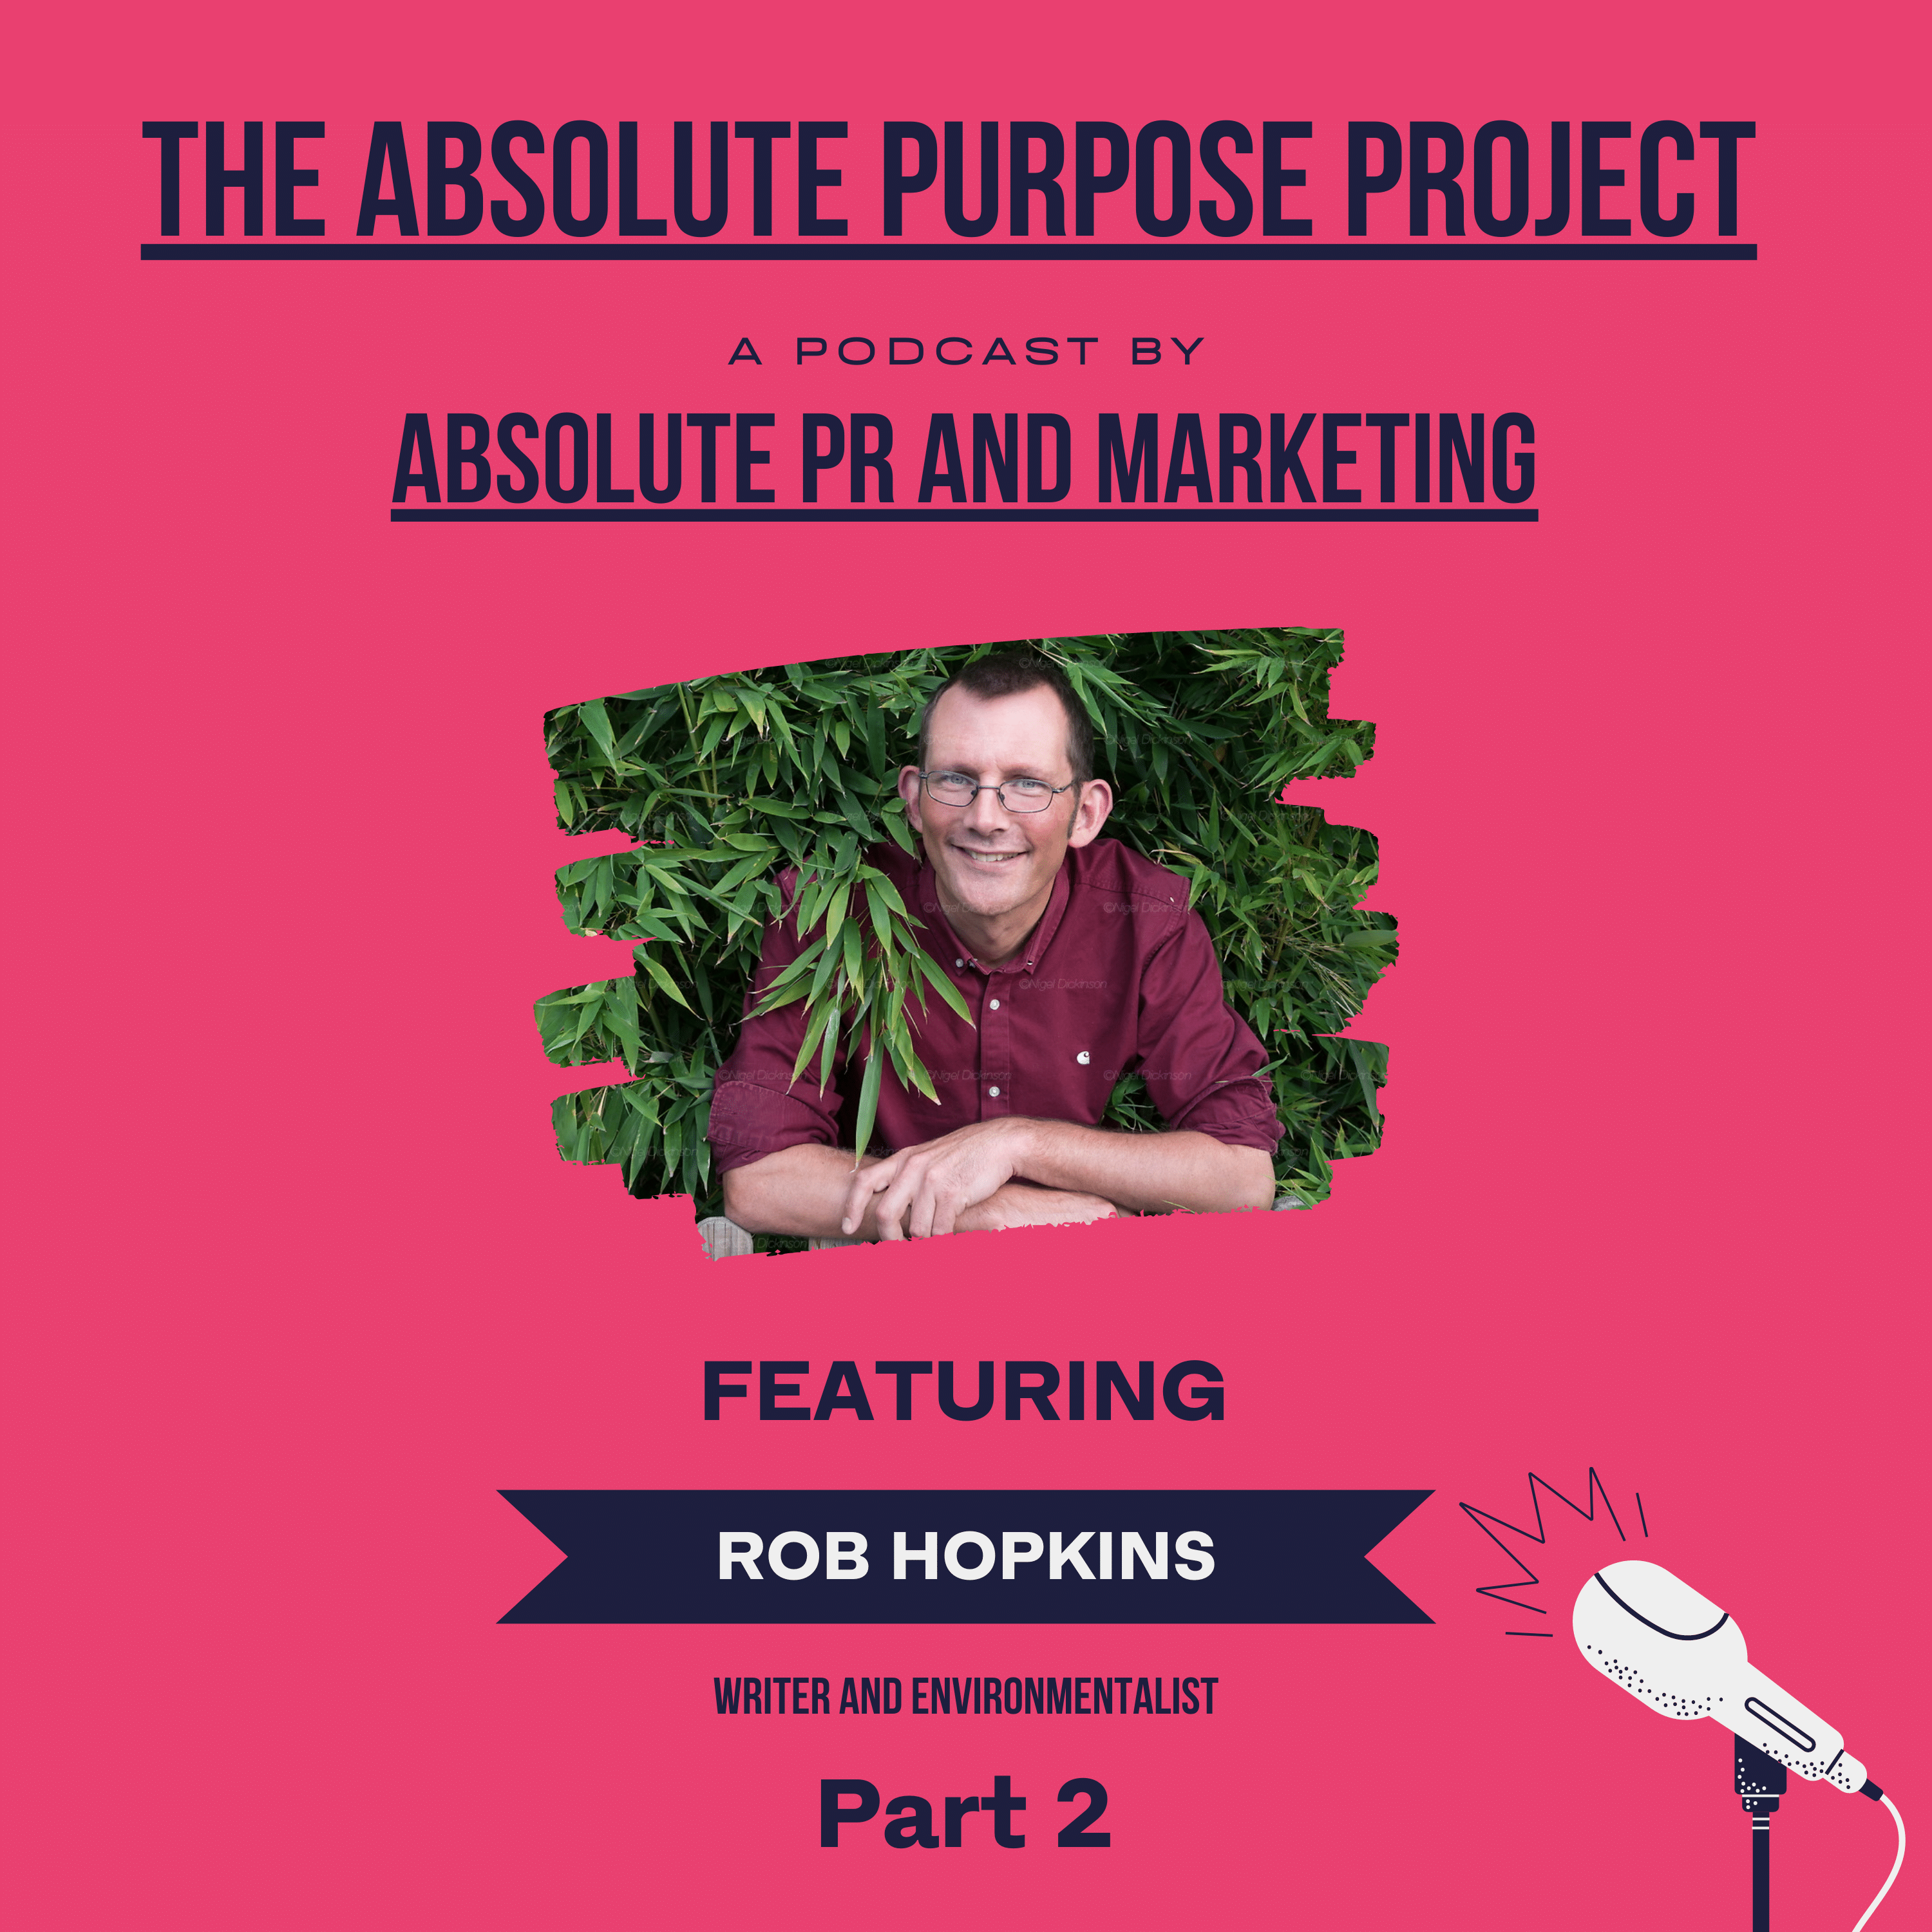 Rob Hopkins on The Absolute Purpose Project podcast part 2